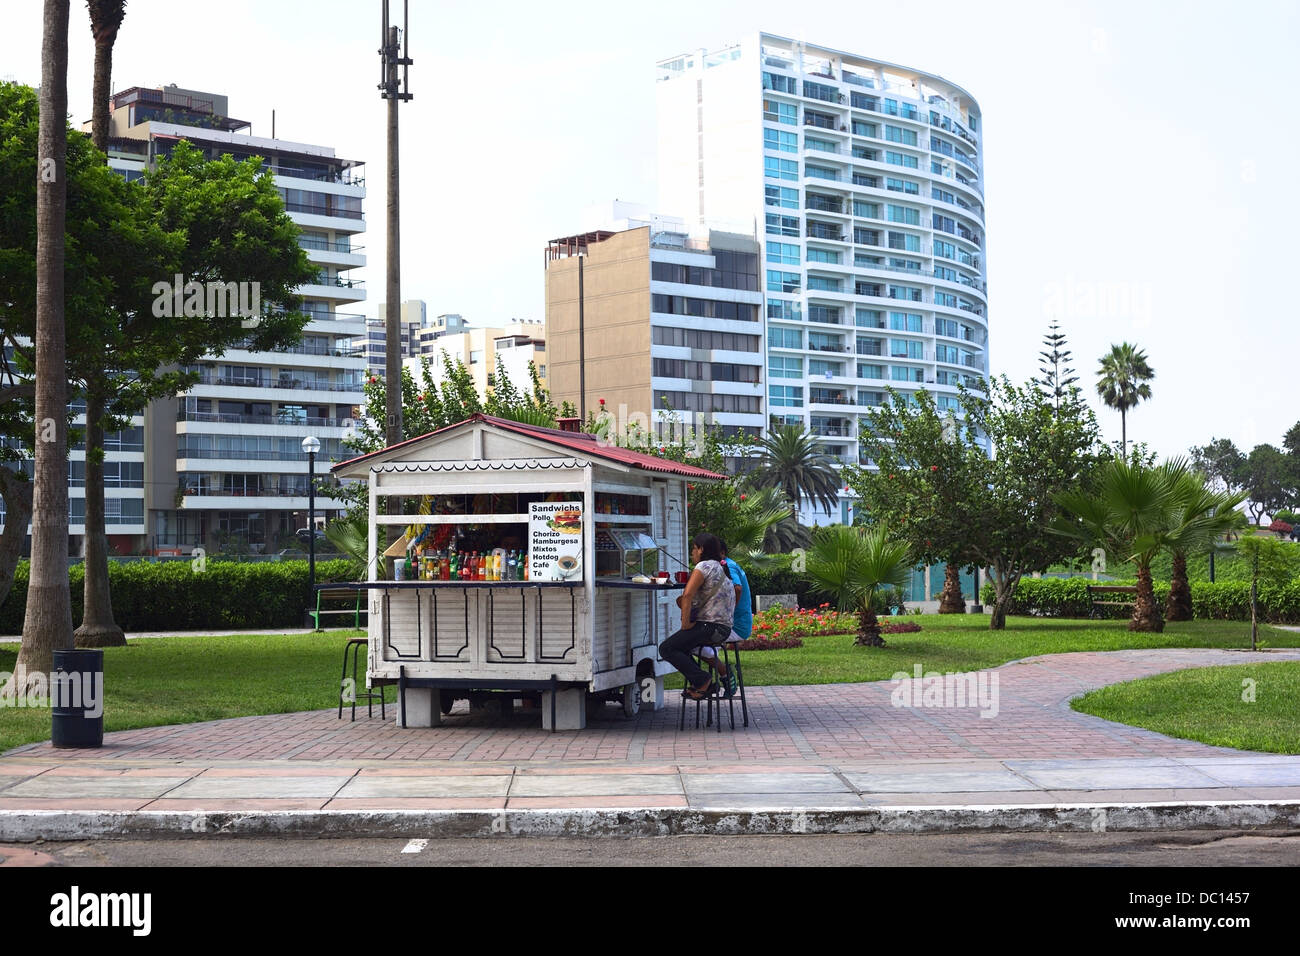 Snack stand selling drinks and sandwiches along Malecon Balta in Miraflores, Lima, Peru Stock Photo